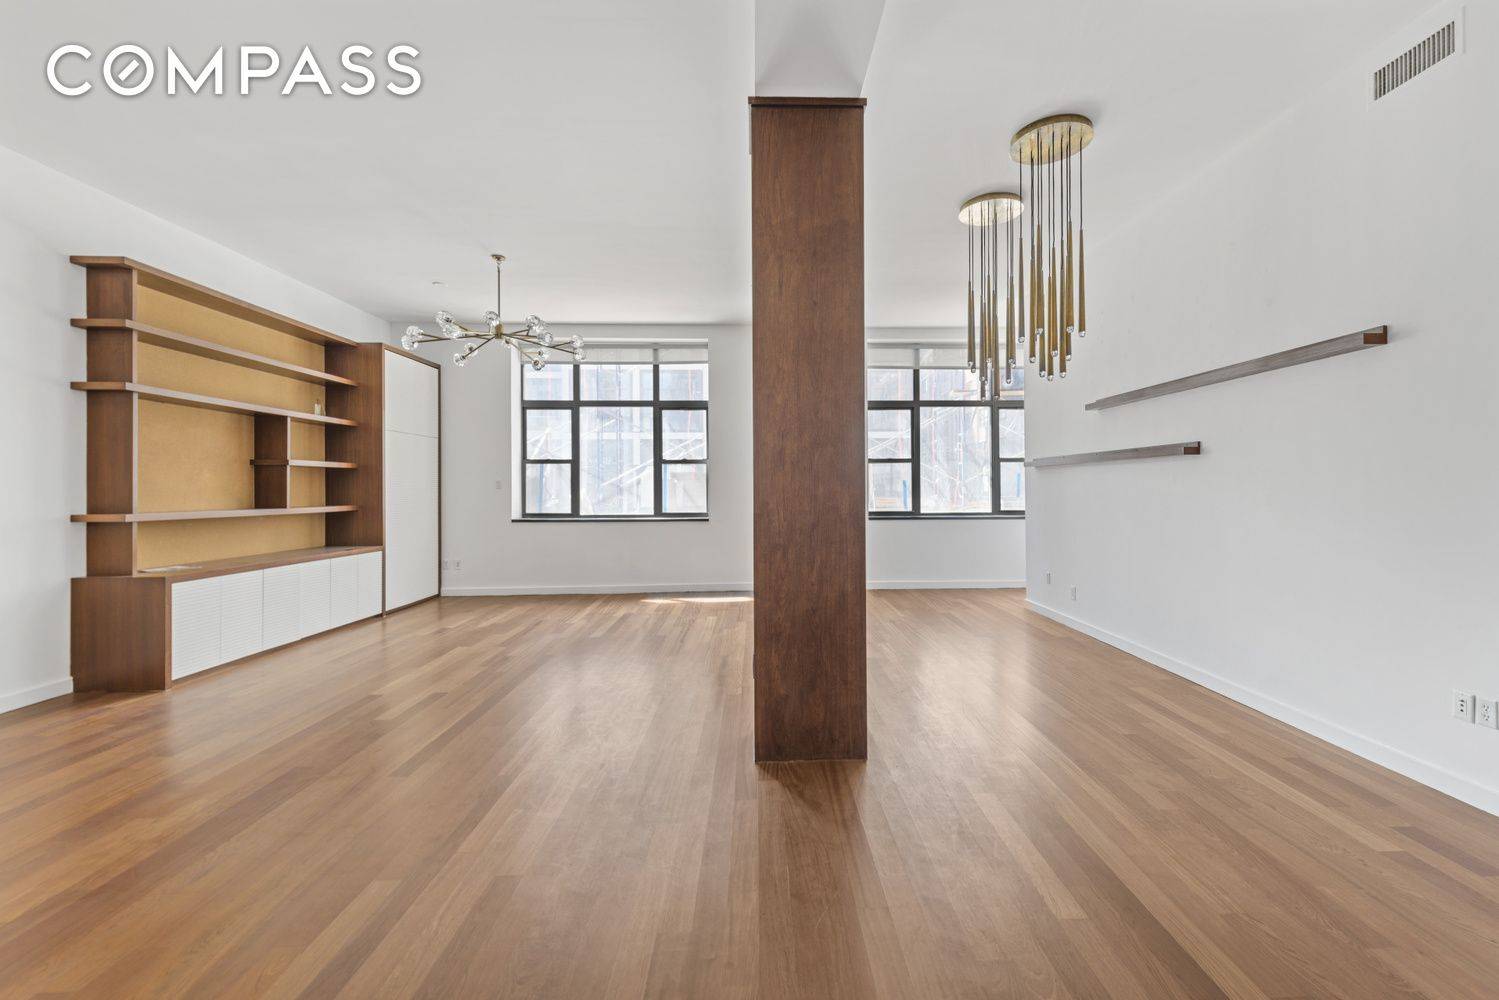 Brand new to the market, this designer loft in the heart of The Meatpacking District is an absolute must see.